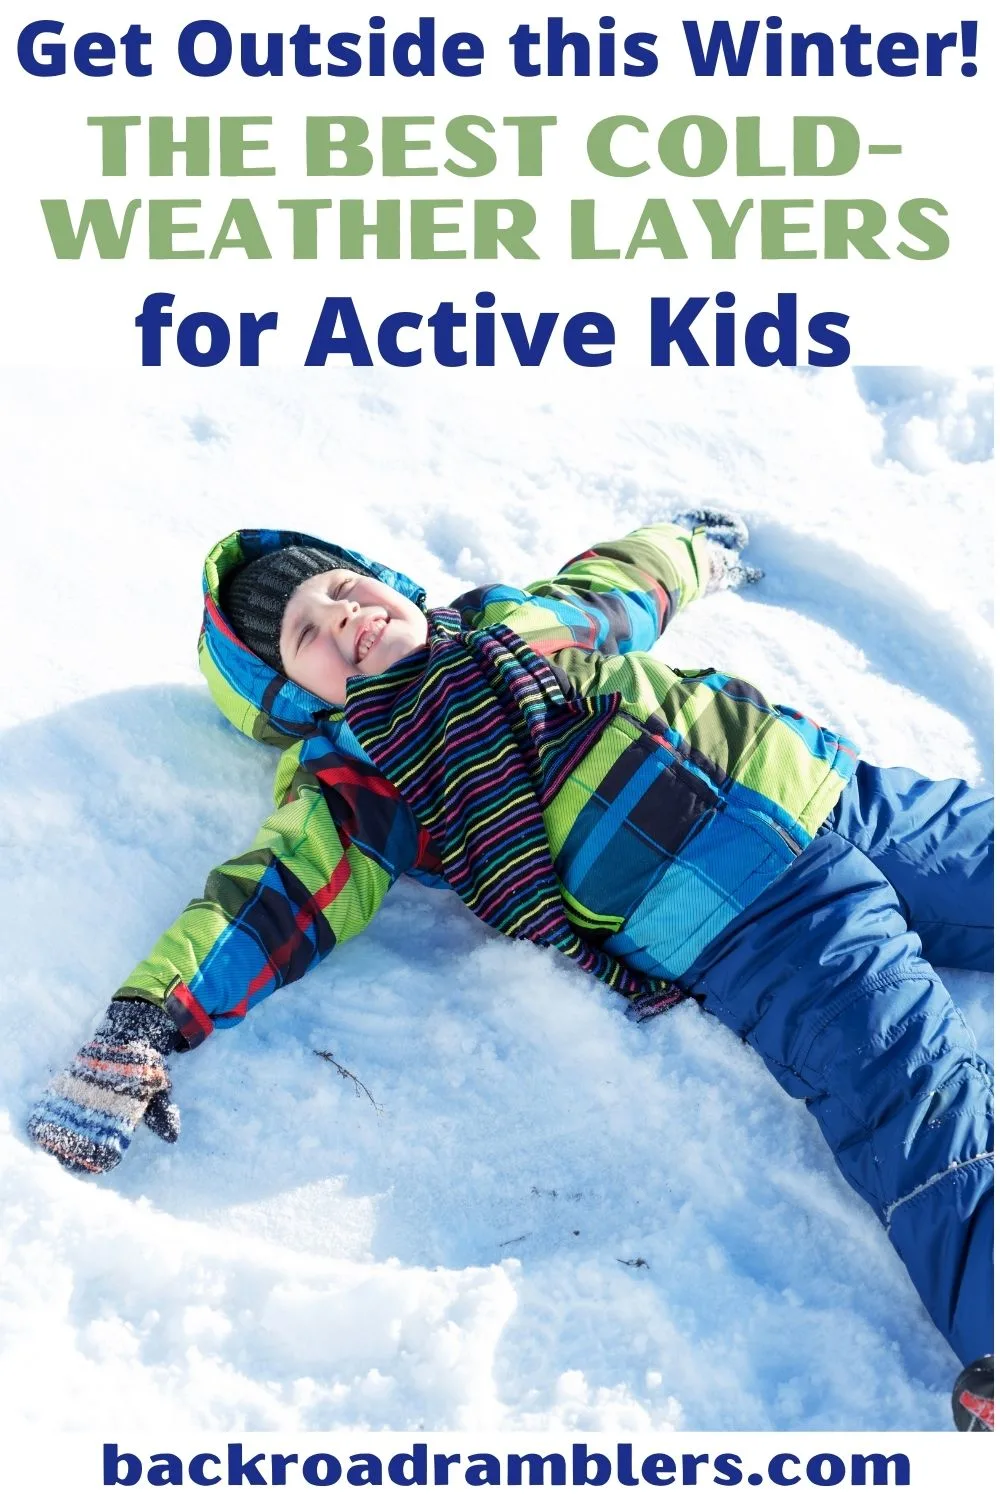 A boy makes a snow angel wearing winter clothes. Text overlay: Get outside this winter. The best cold weather layers for active kids.